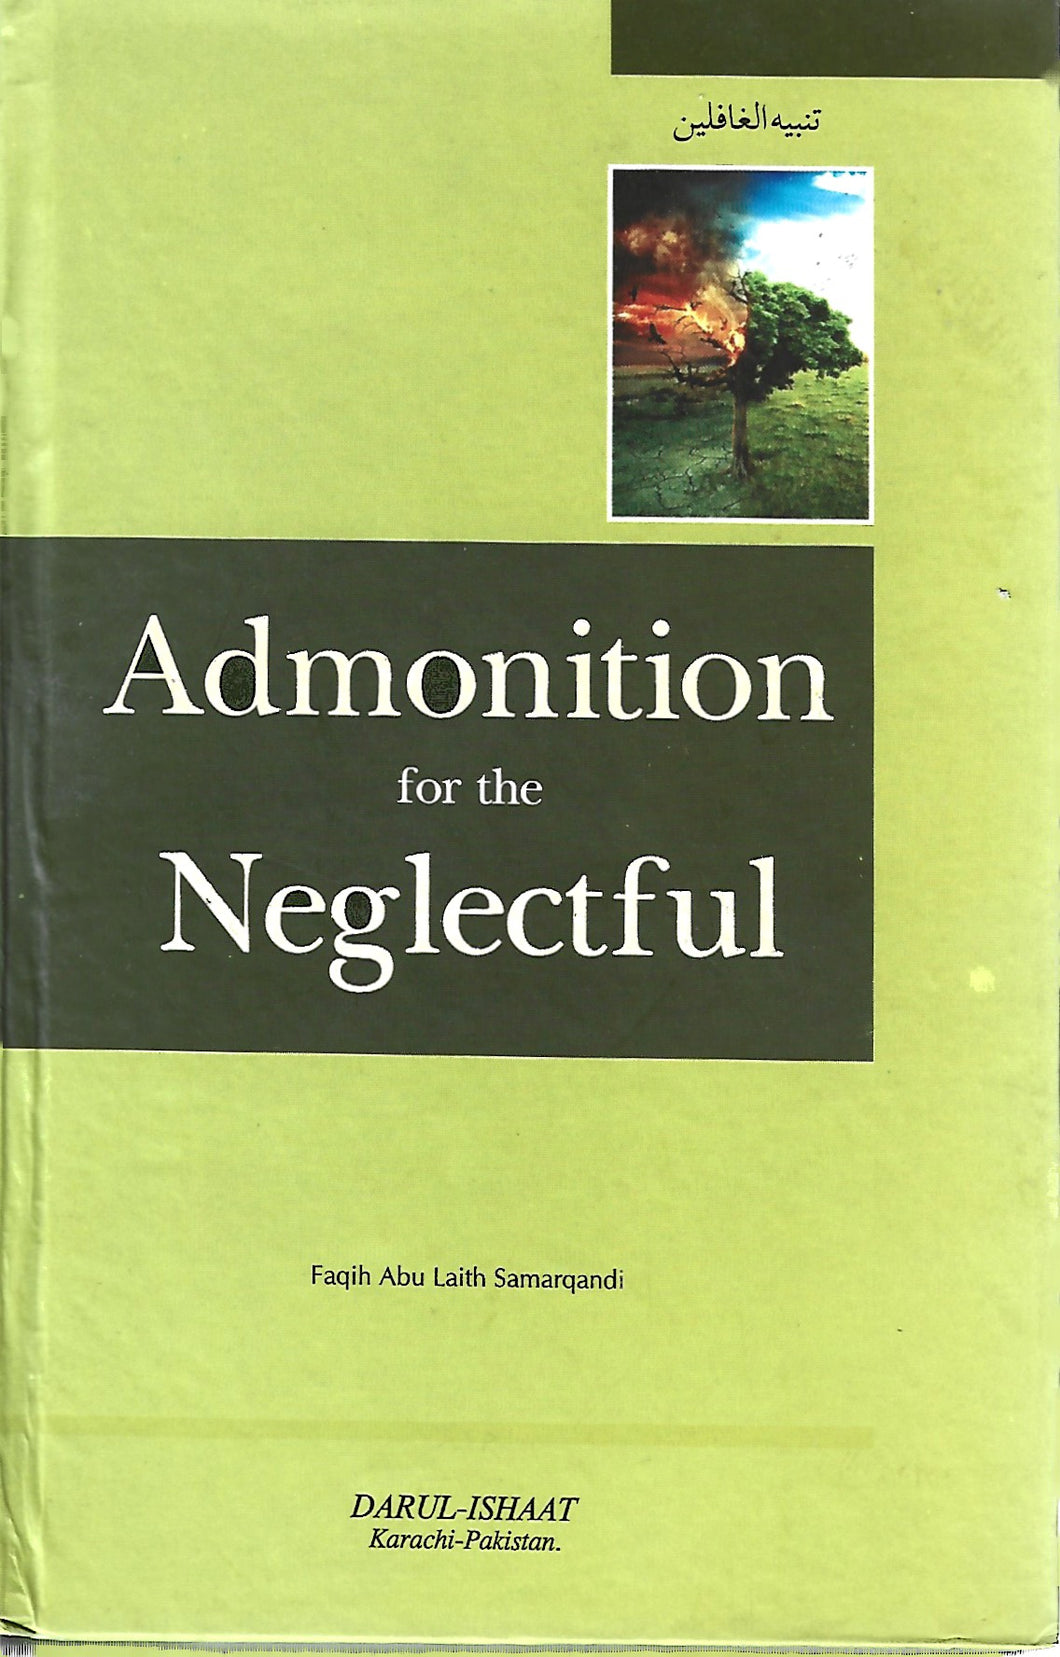 Admonition for the Neglected